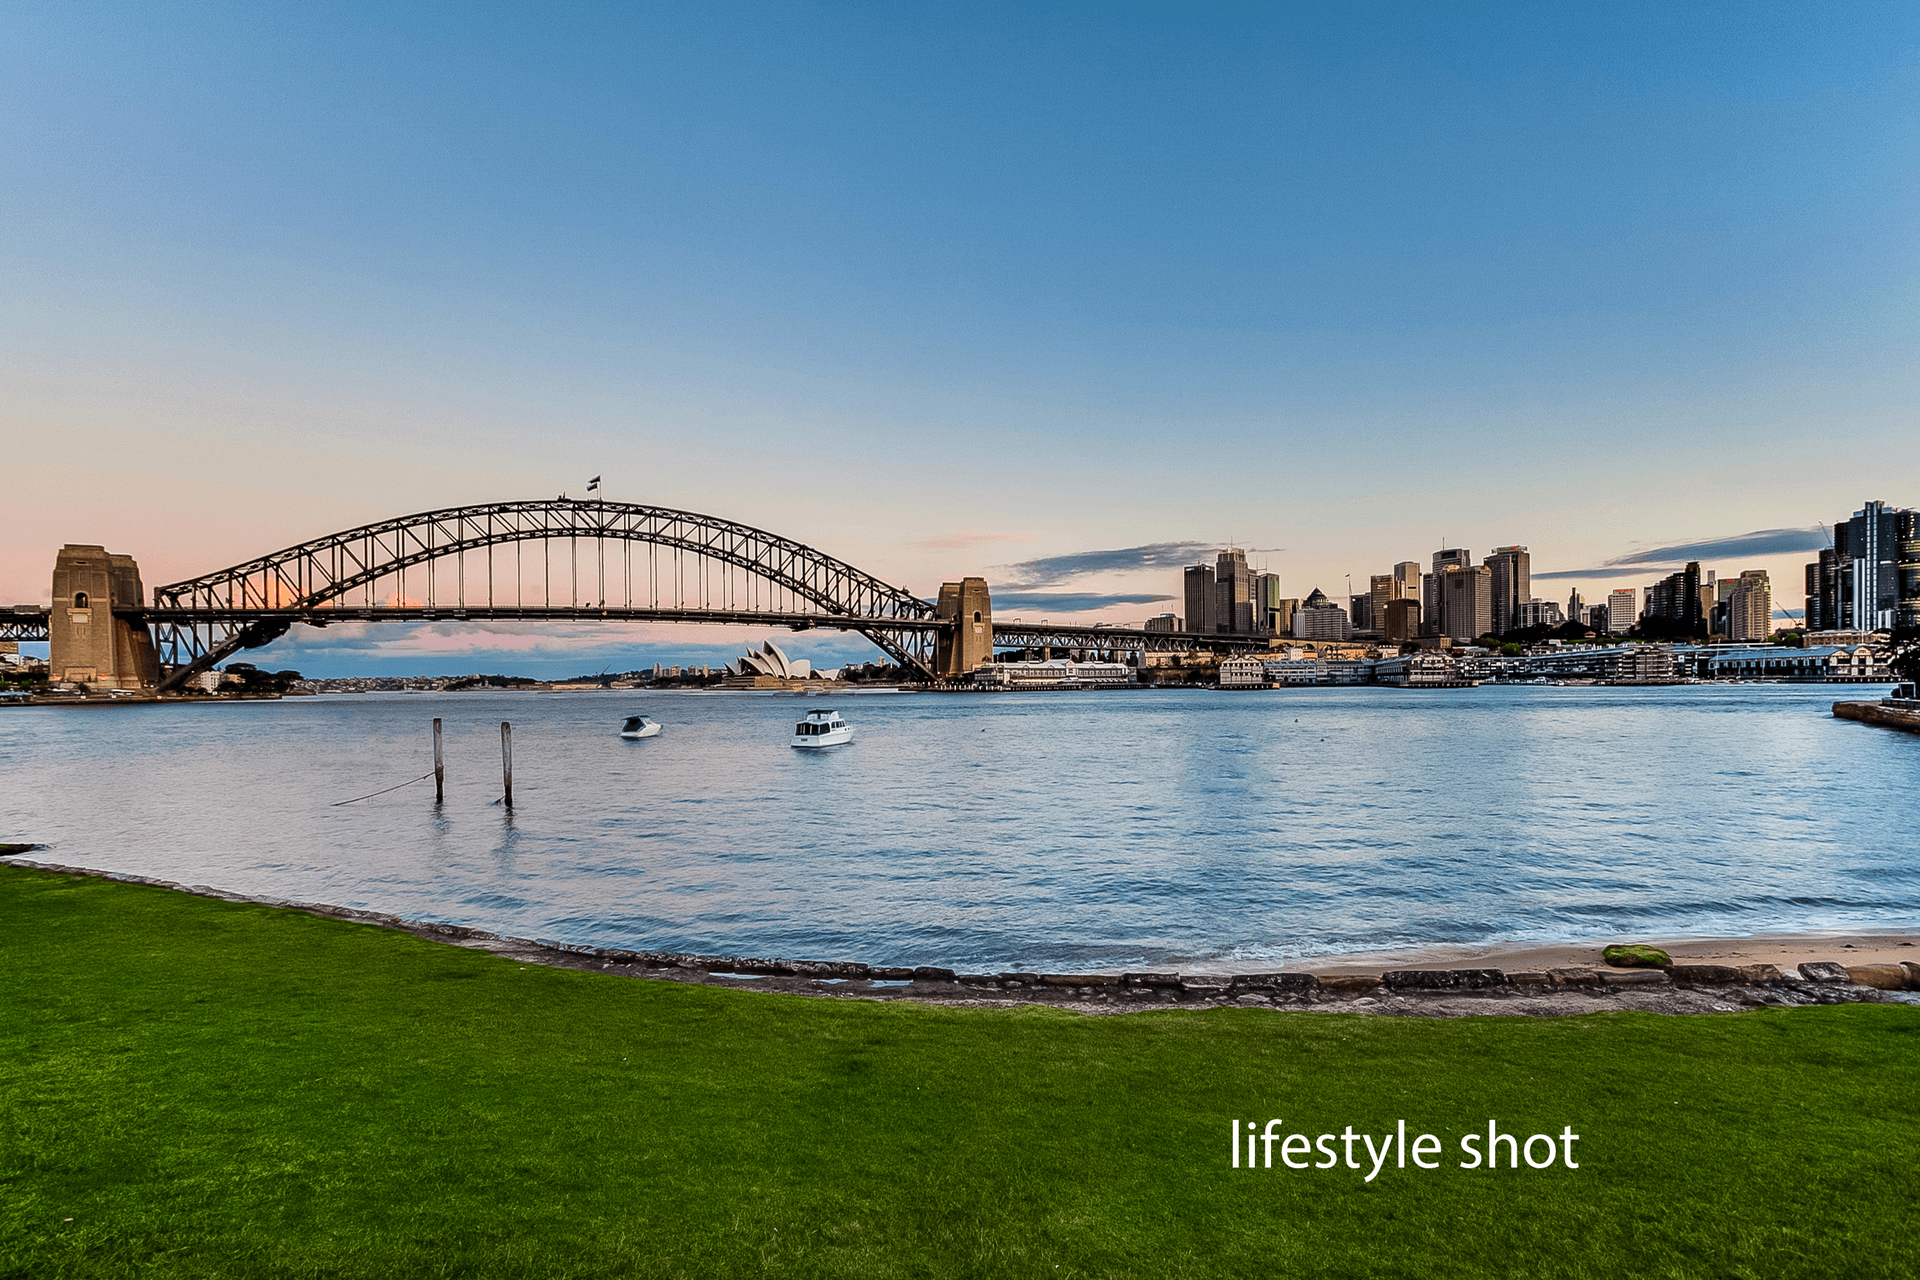 8/36 East Crescent Street, McMahons Point, NSW 2060